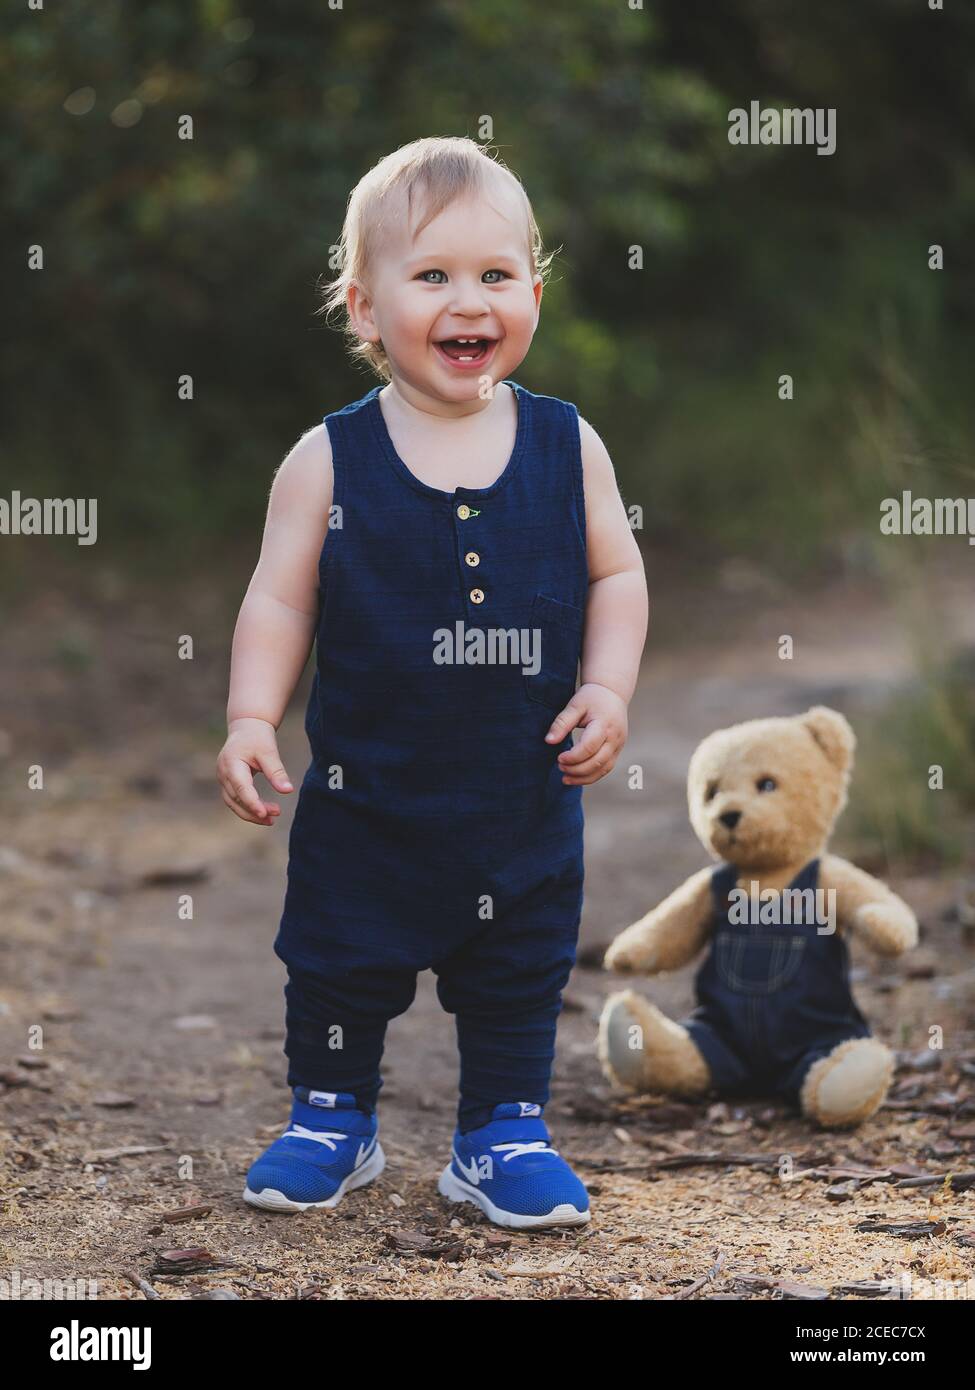 Cheerful little boy standing at bear toy in denim clothes in nature. Stock Photo